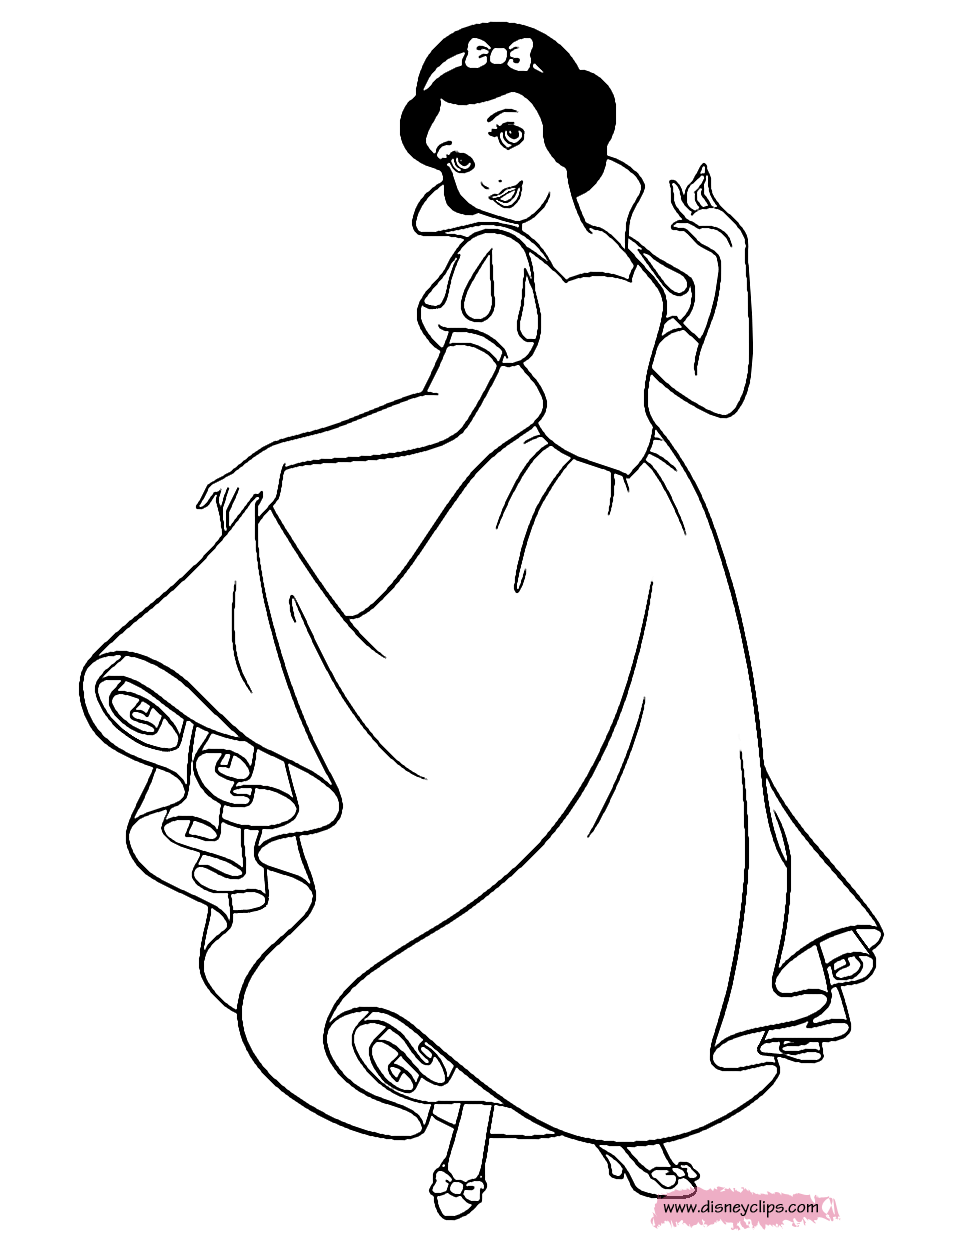 Disney Snow White Coloring Pages | Thousand of the Best ...